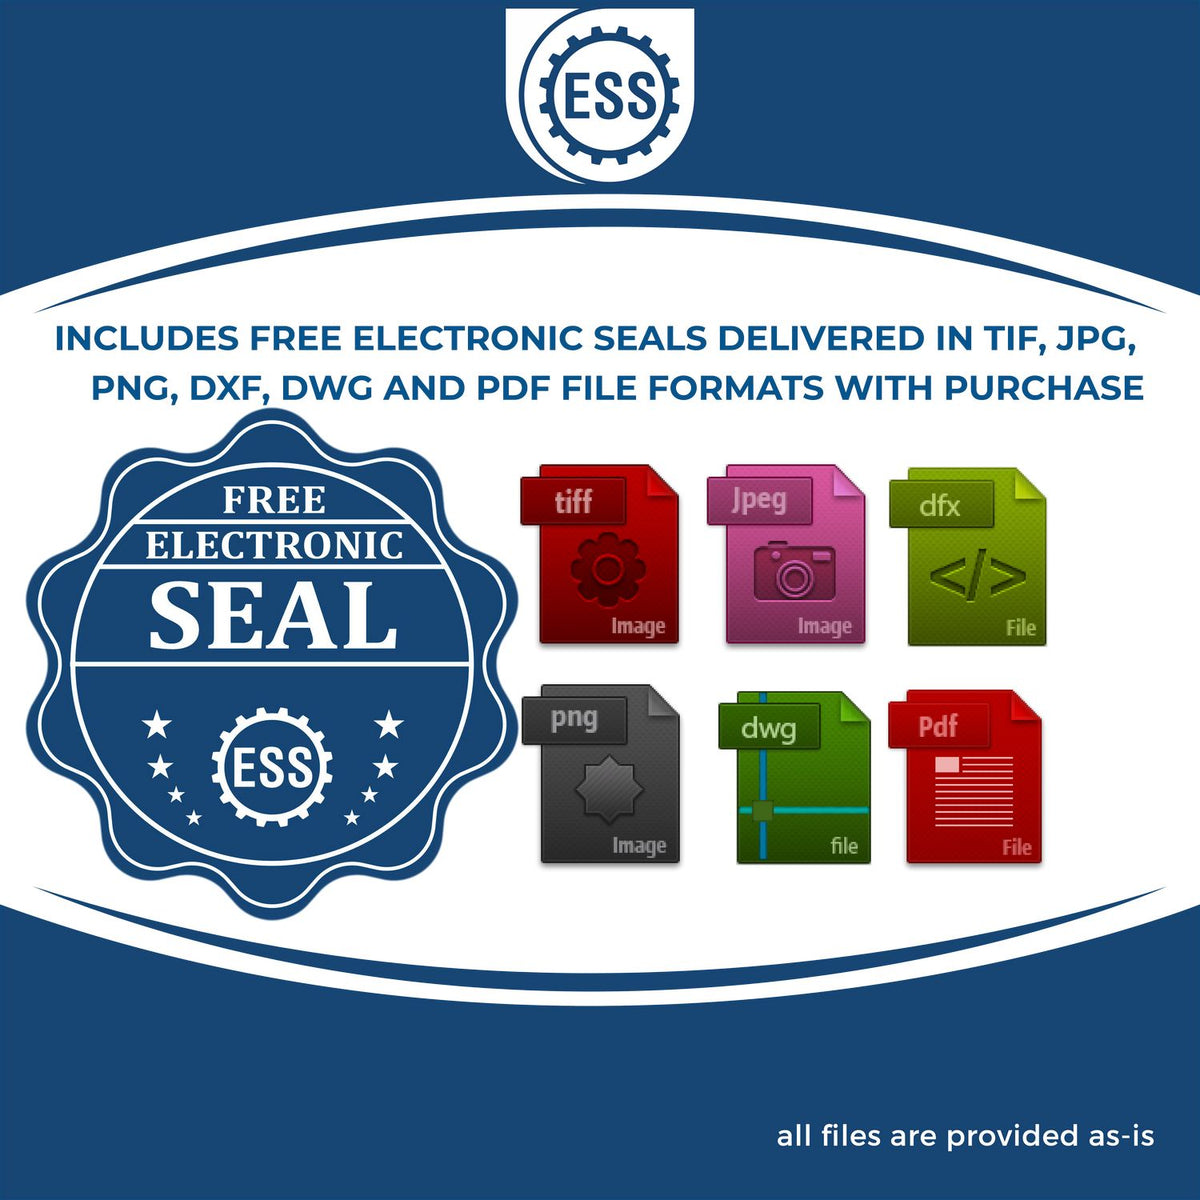 An infographic for the free electronic seal for the Hybrid Georgia Geologist Seal illustrating the different file type icons such as DXF, DWG, TIF, JPG and PNG.